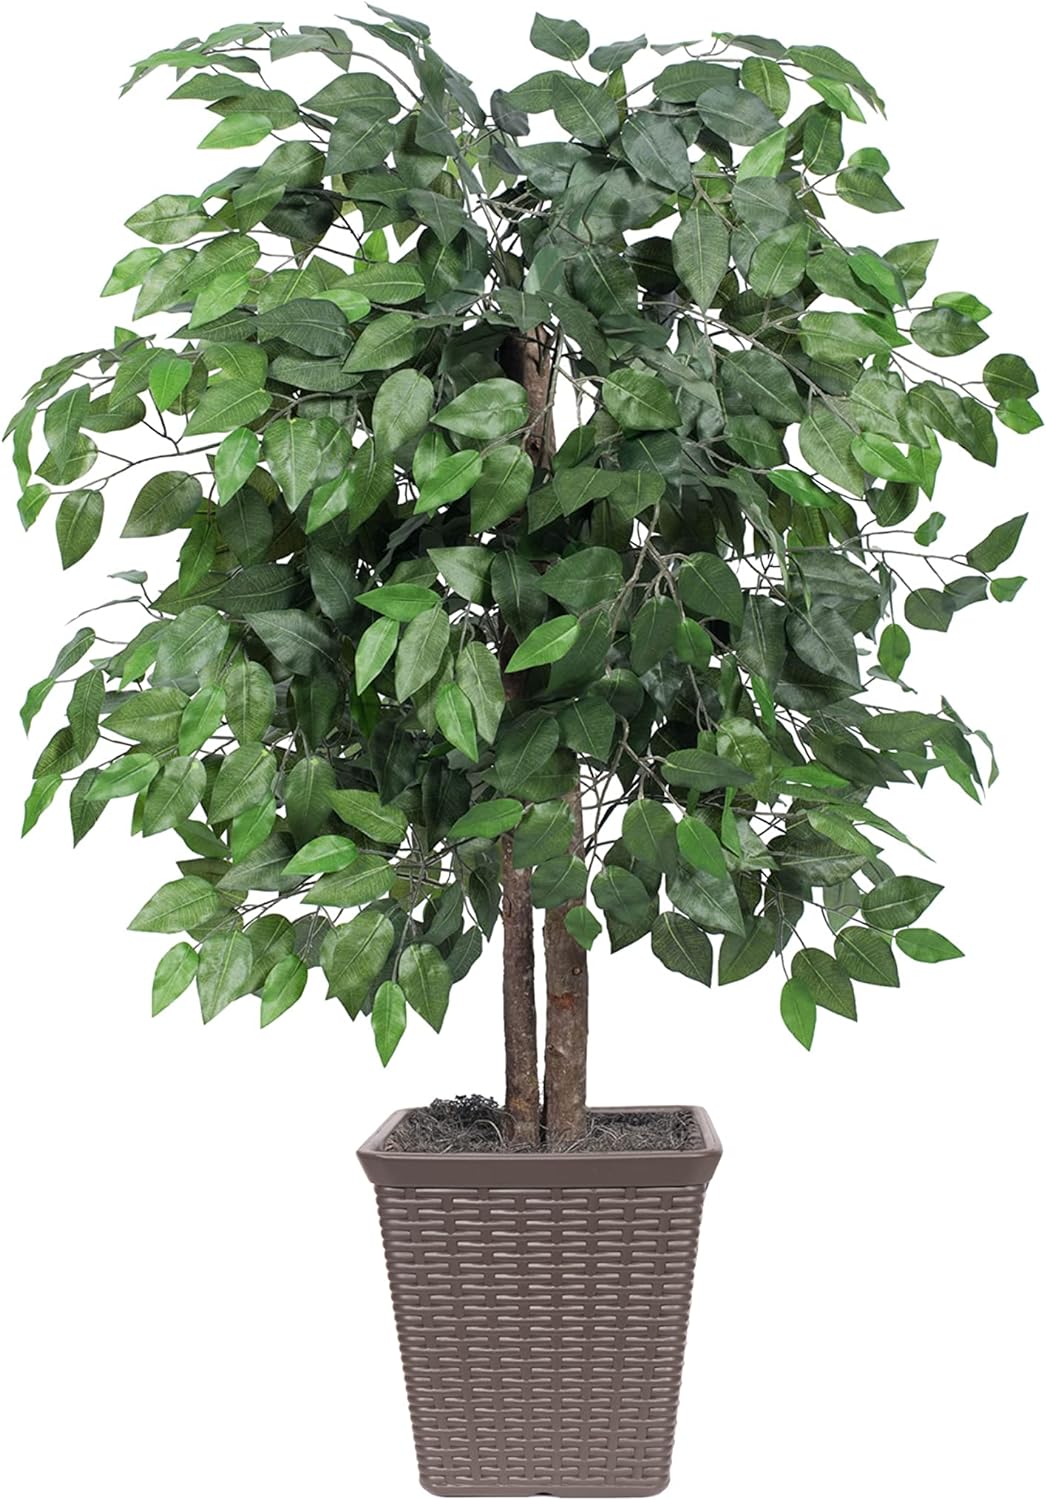 Vickerman Everyday 4' Artificial Ficus Bush in a Brown Square Pot - Lifelike Home Or Office Decor - Premium Faux Potted Plant - Maintenance Free Ficus Plant